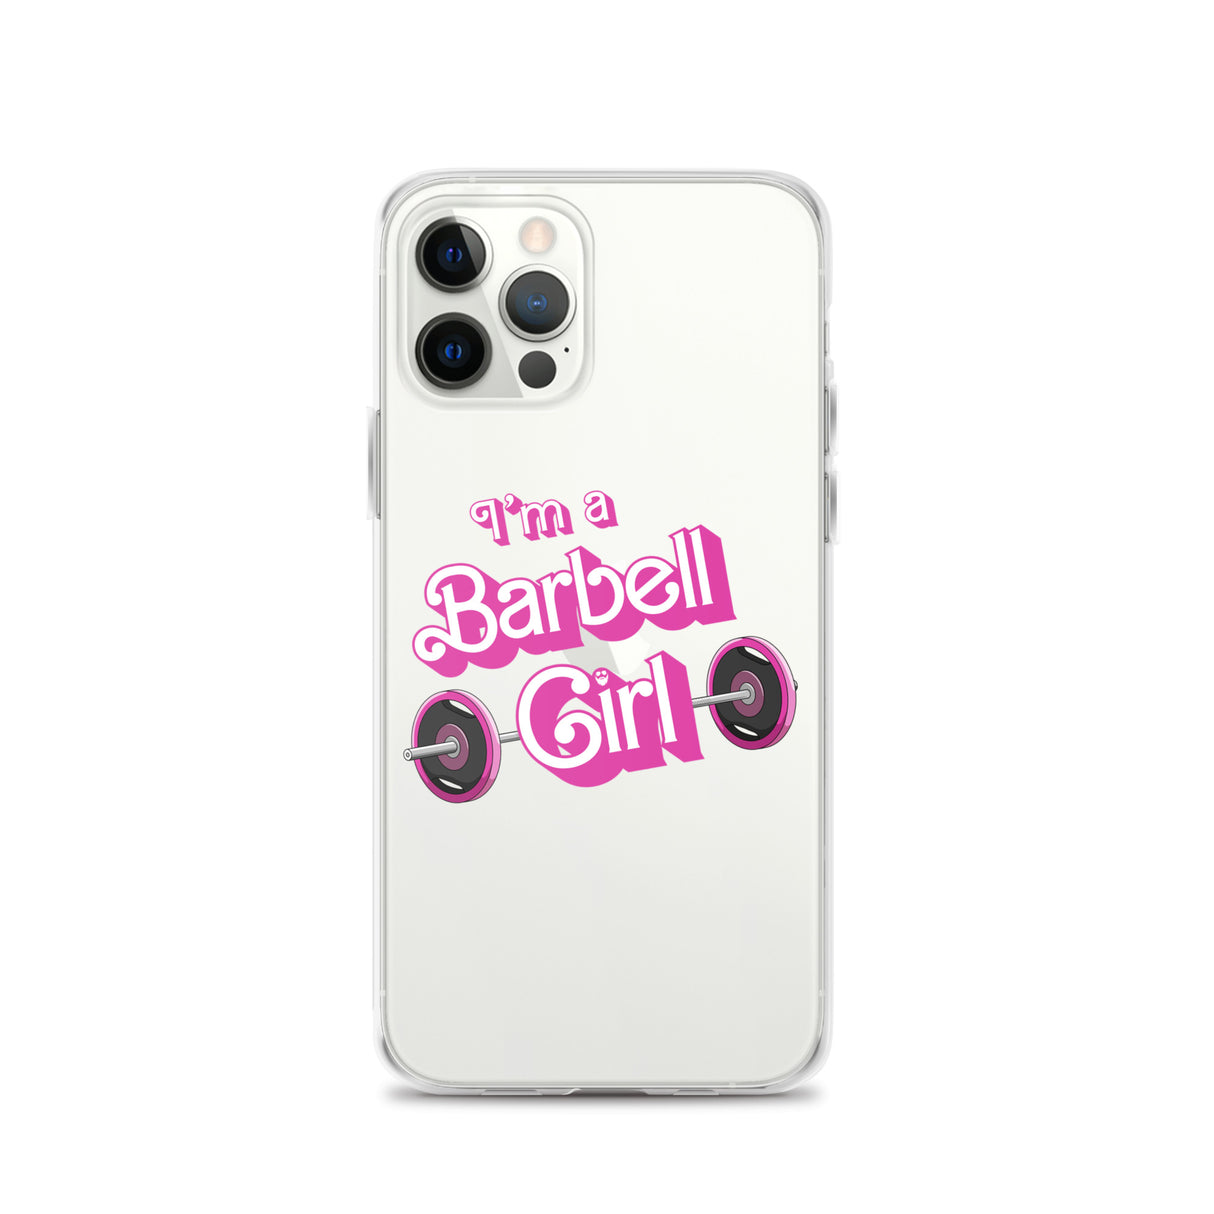 I'm a Barbell Girl iPhone Case